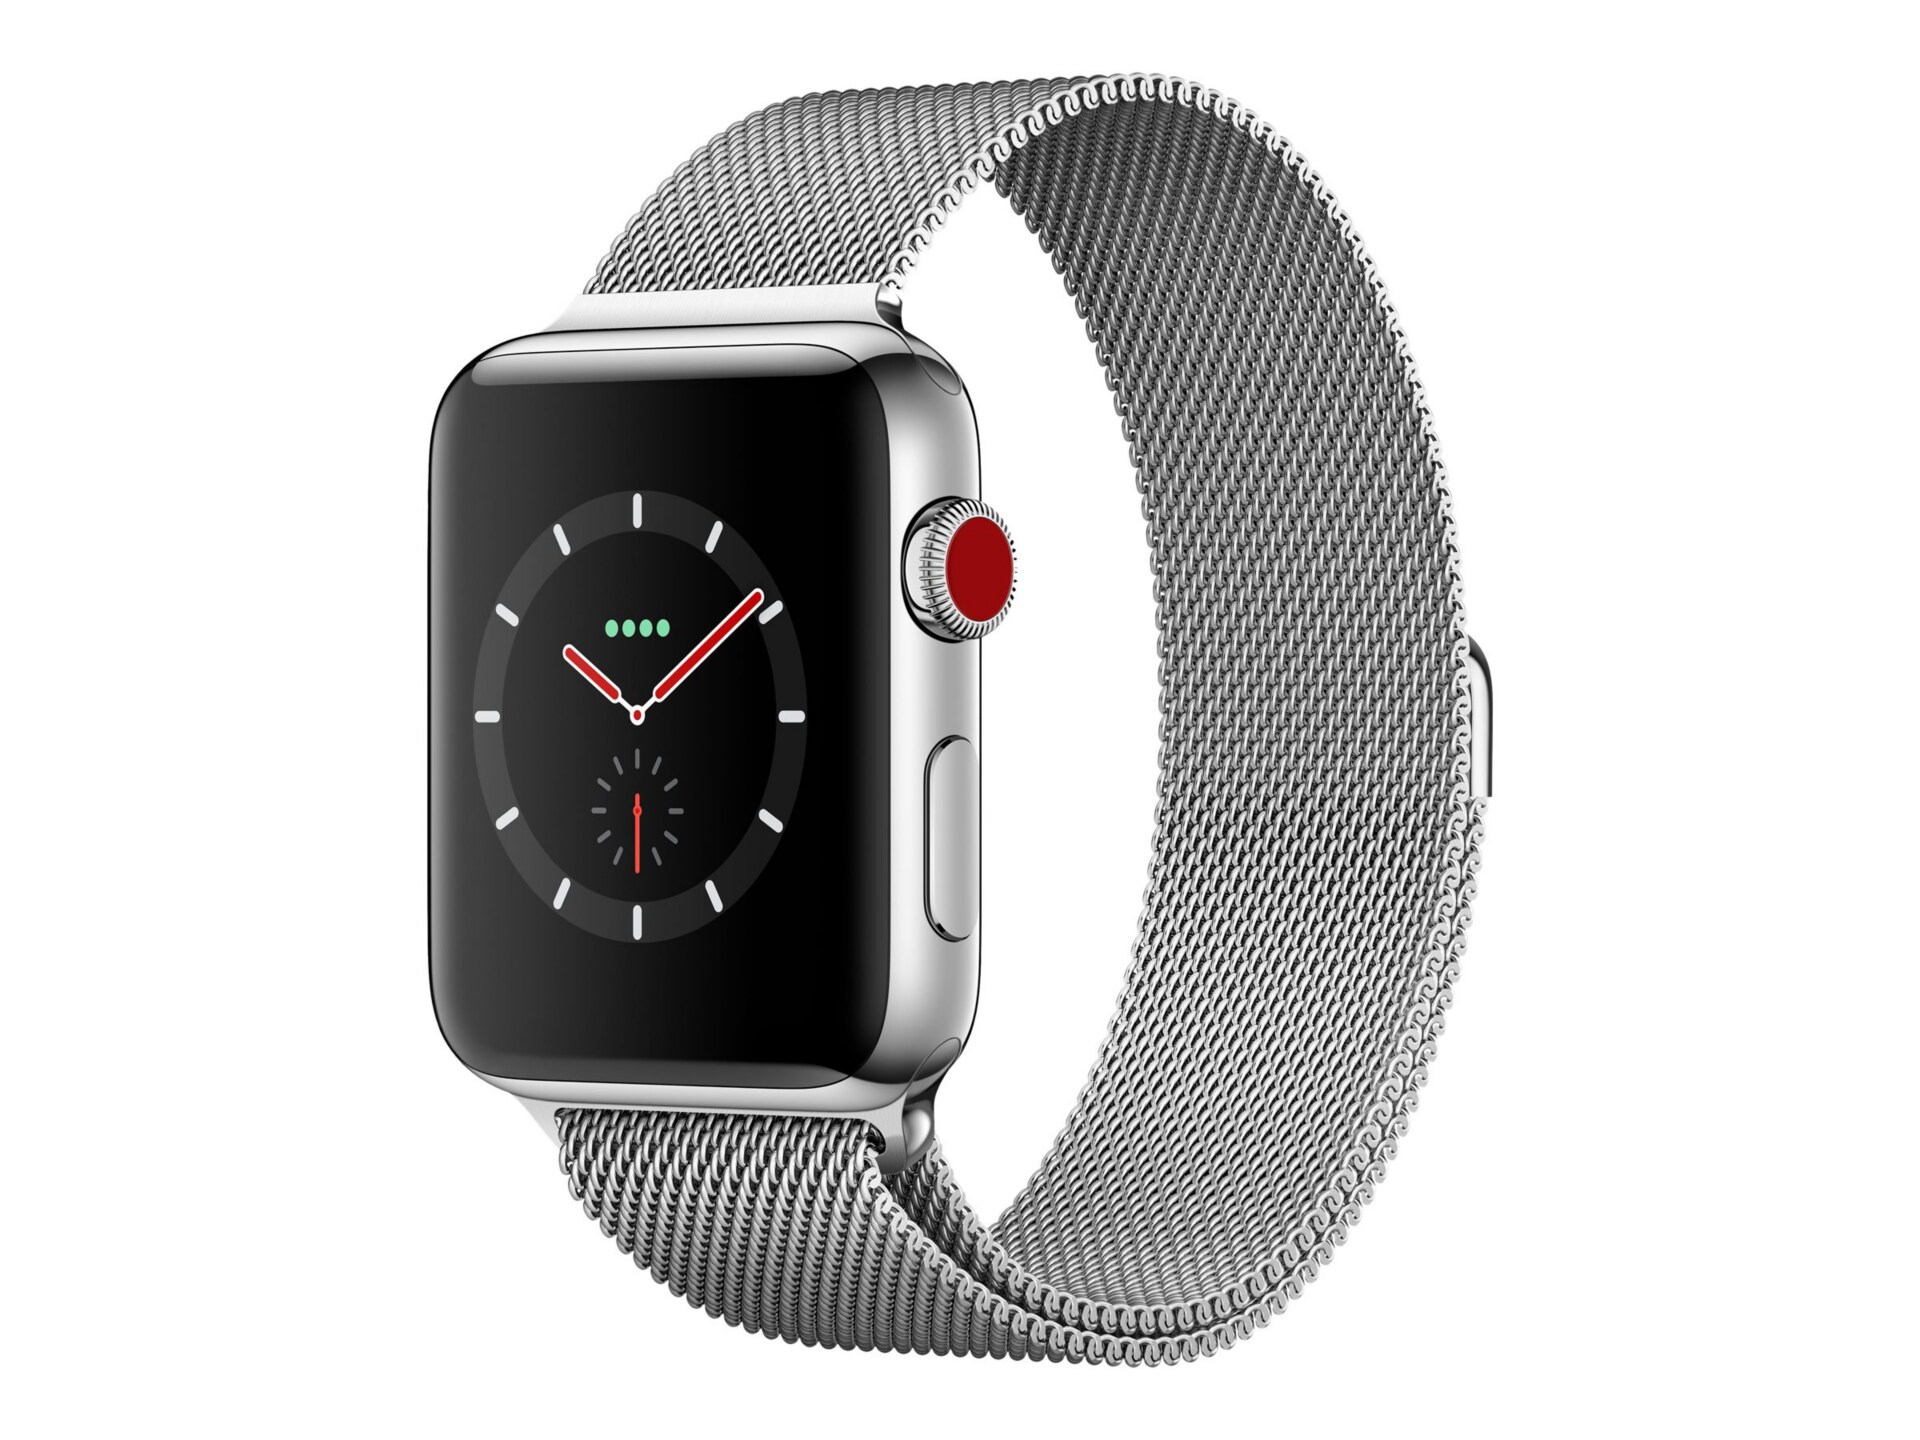 Apple Watch Series 3 (GPS + Cellular) - stainless steel - smart watch with milanese loop - 16 GB - not specified